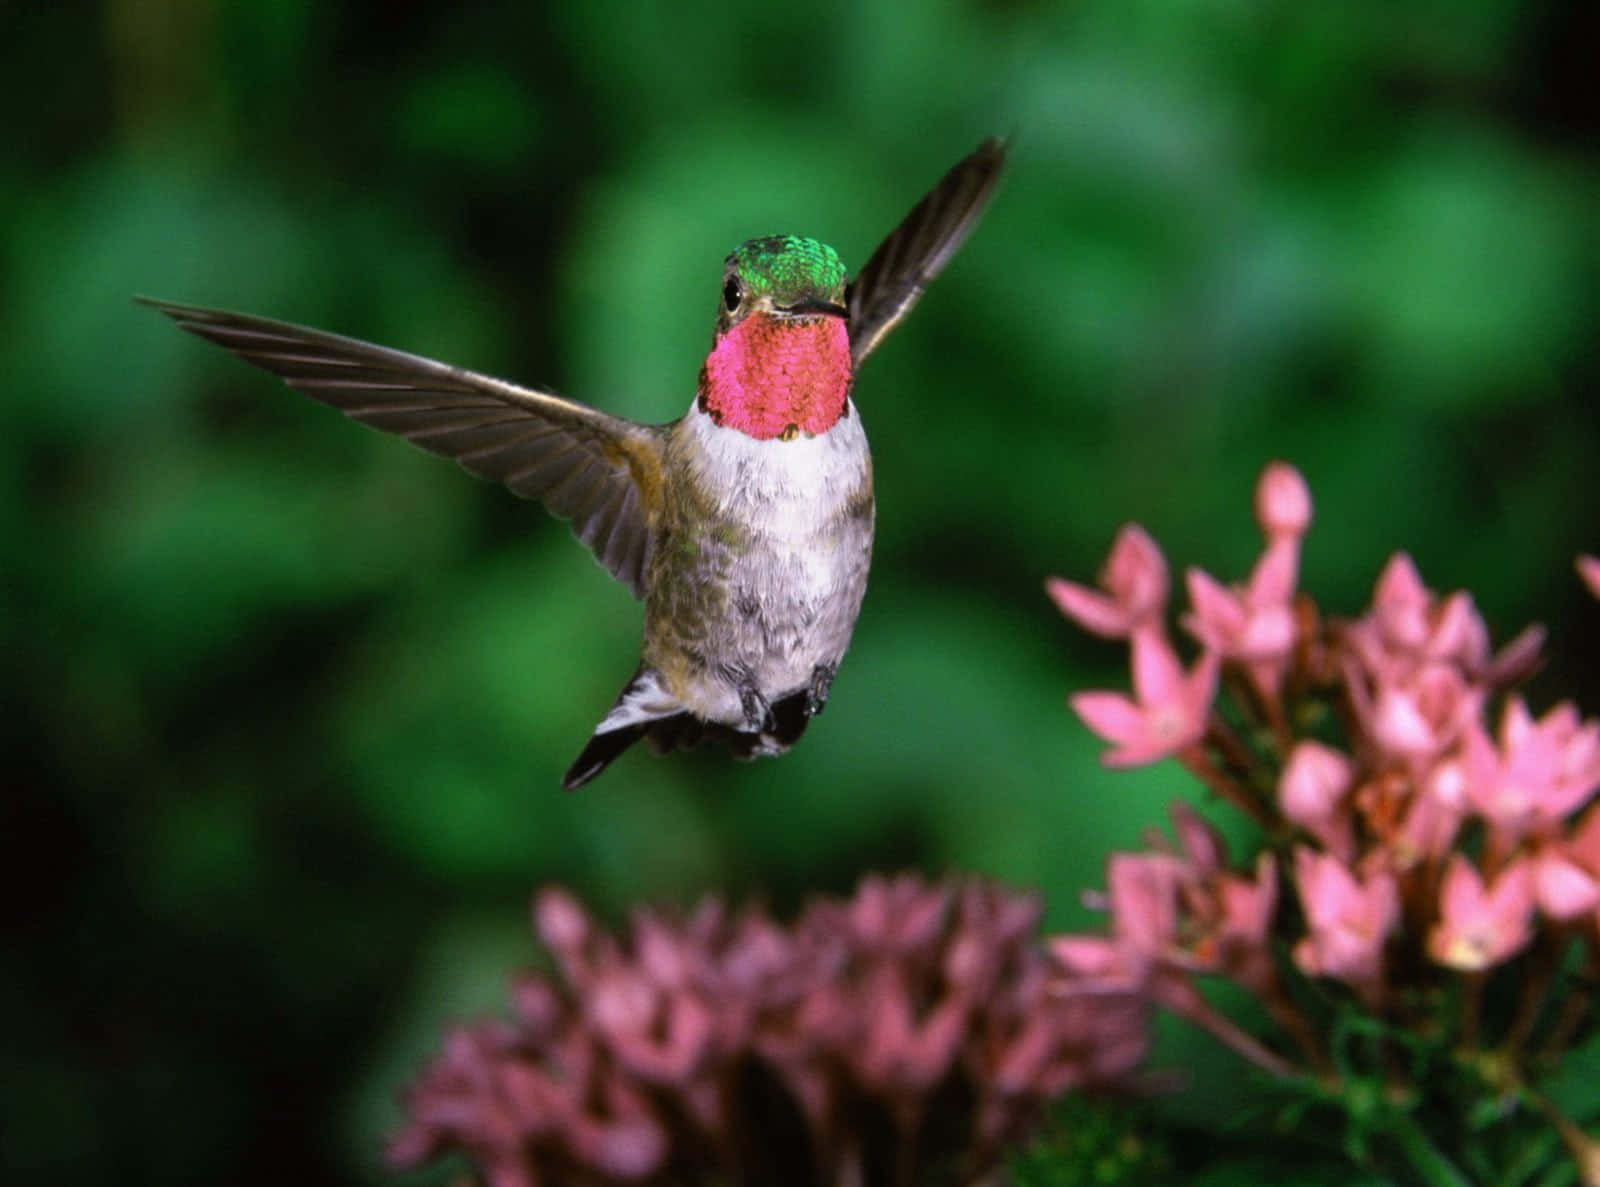 Image  A female hummingbird hovering beside a bright pink flower